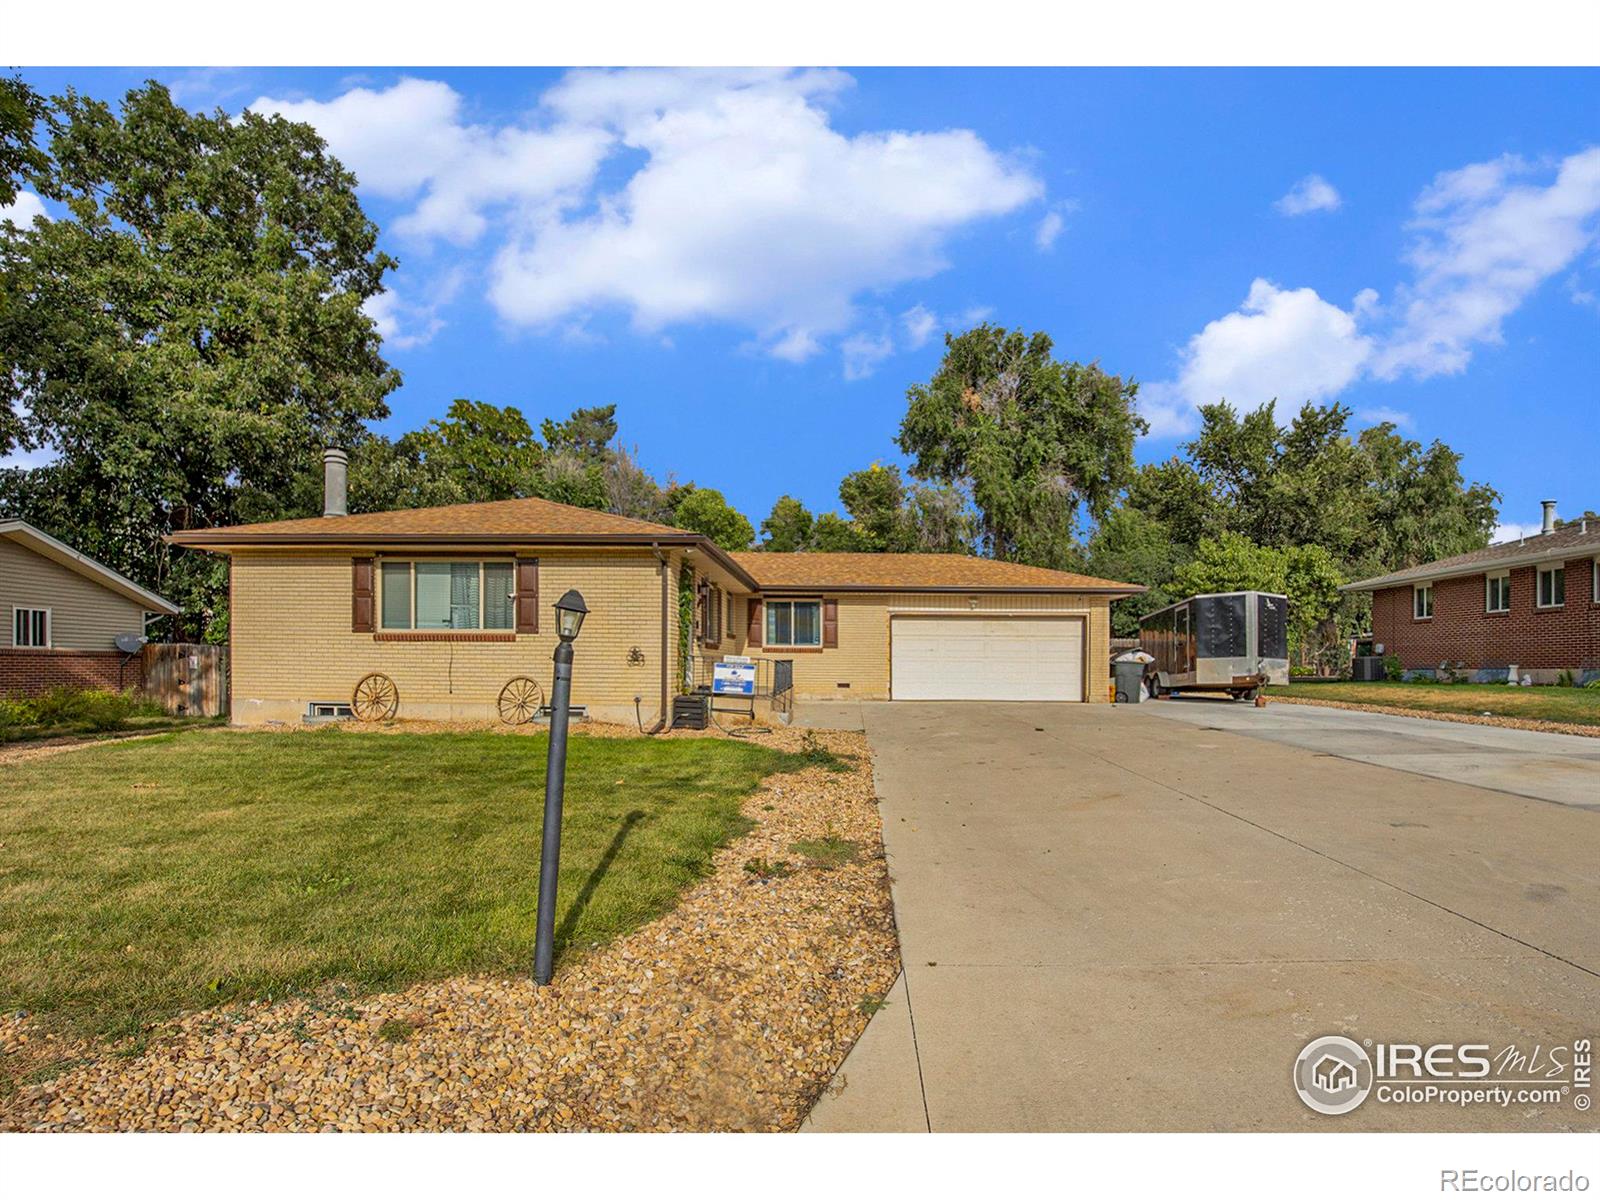 1948  23rd Ave Ct, greeley MLS: 123456789997205 Beds: 4 Baths: 3 Price: $410,000